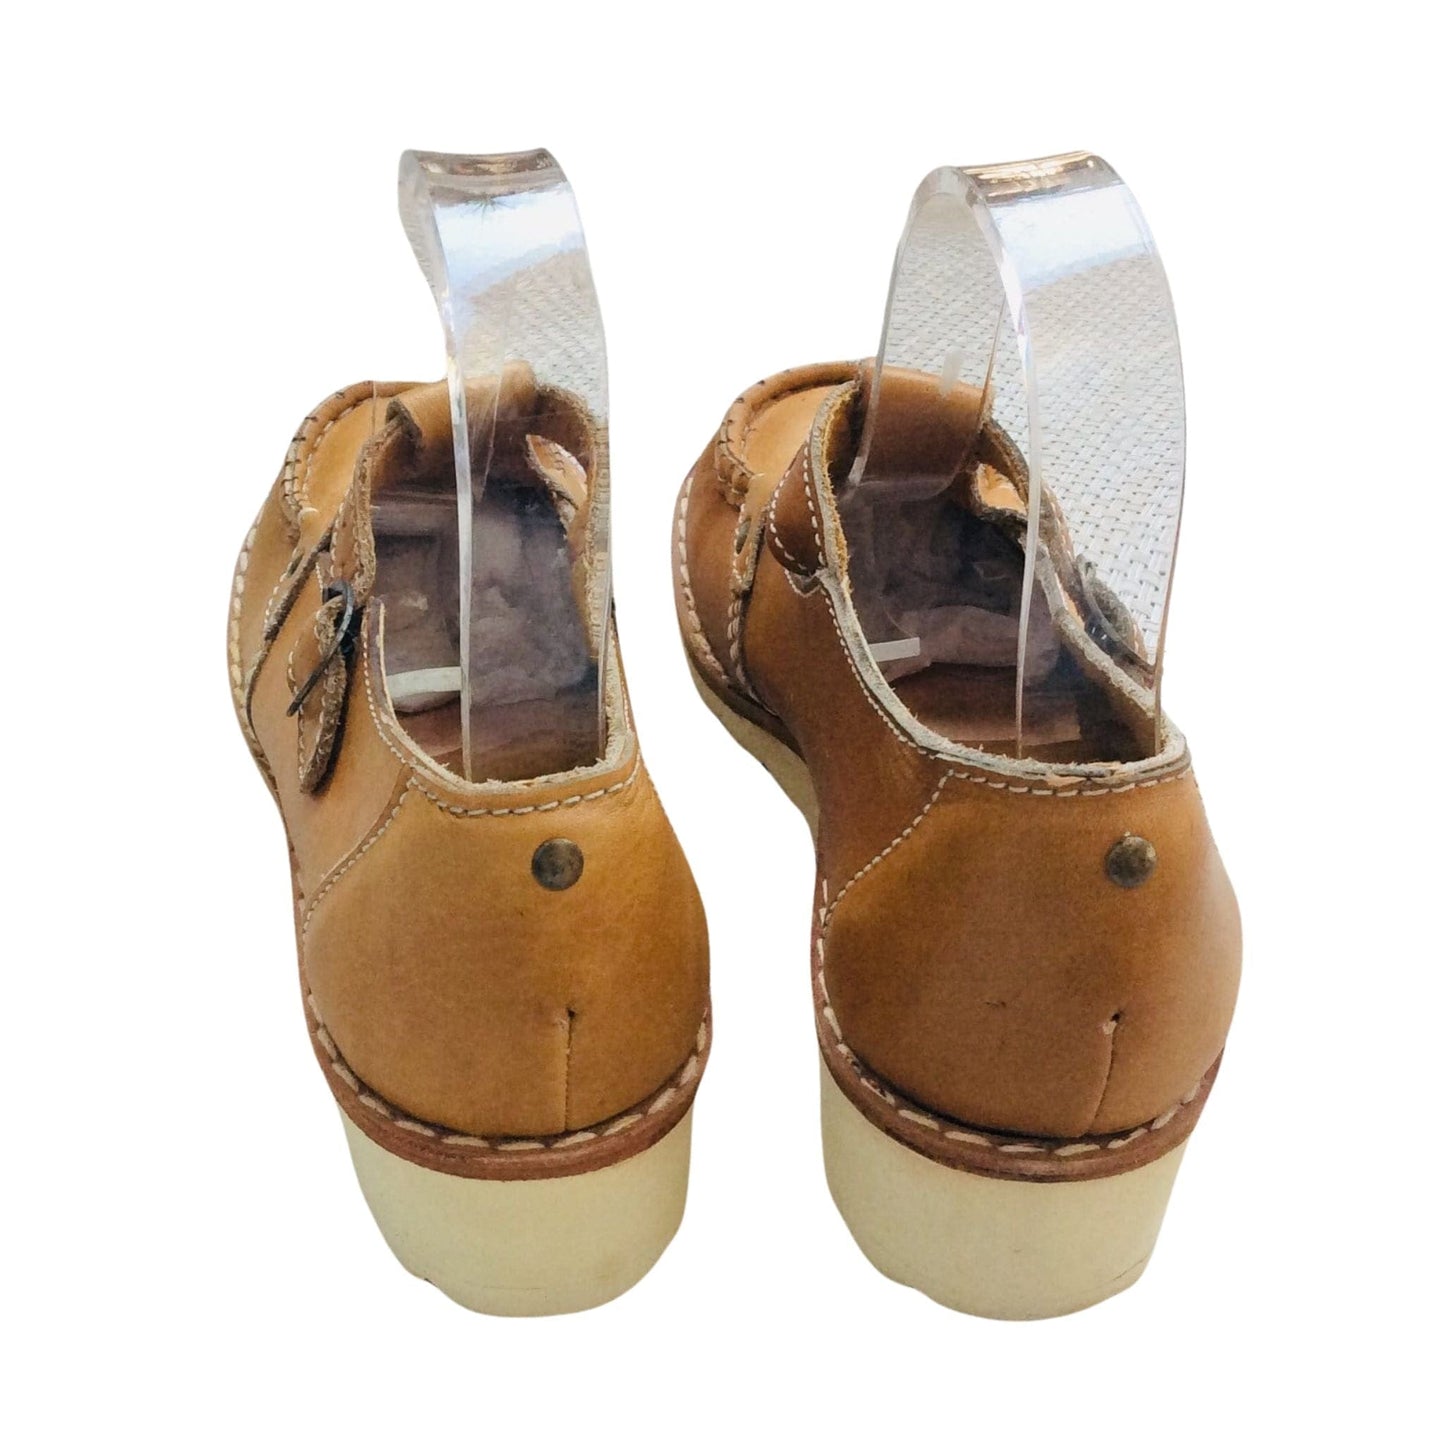 T-Strap Chunky Shoes 8.5 / Tan / Vintage 1970s